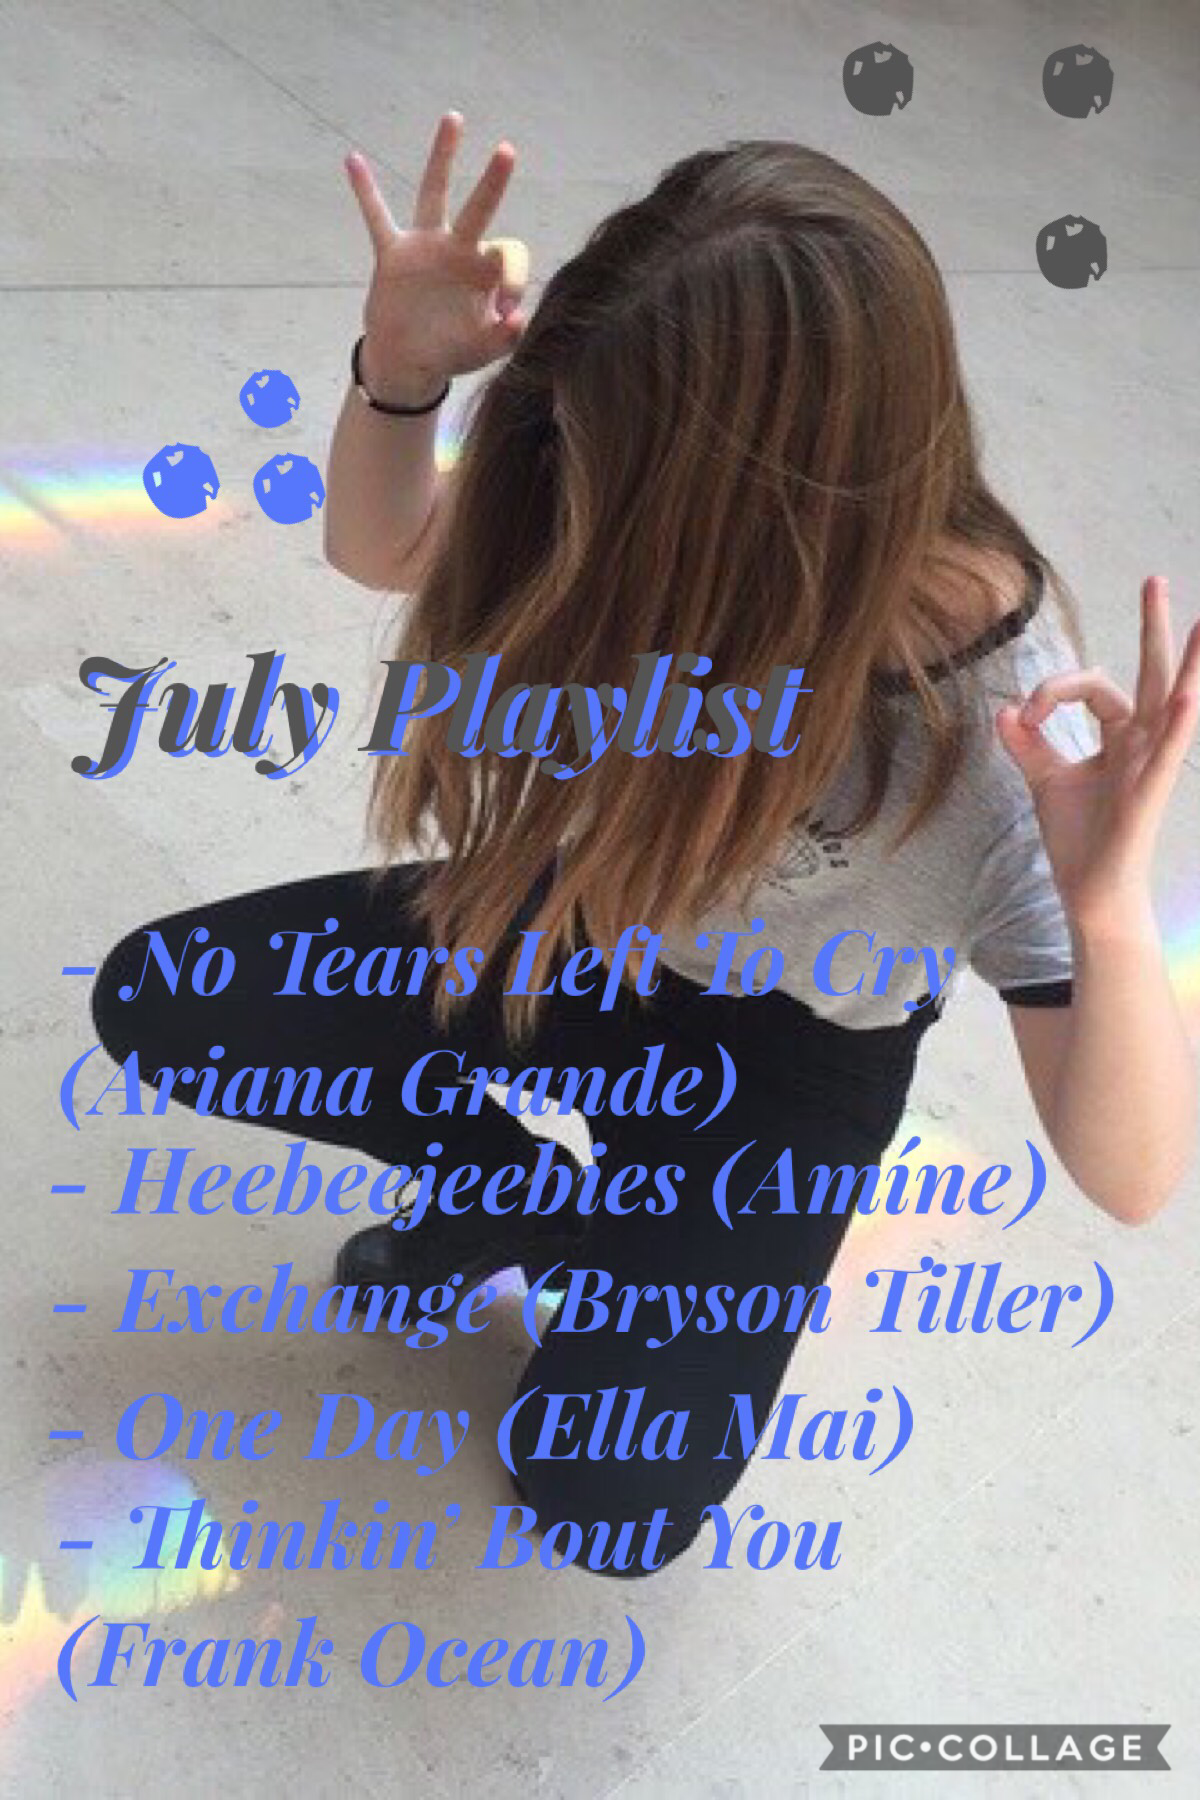 🌈Tap, Please🌈
Here is my July Playlist! Want to make one? Just choose the 5 top songs that you think you would listen to the most to in July, then post! XOXO, yourstrulybby 💞
🌈7/15/18🌈